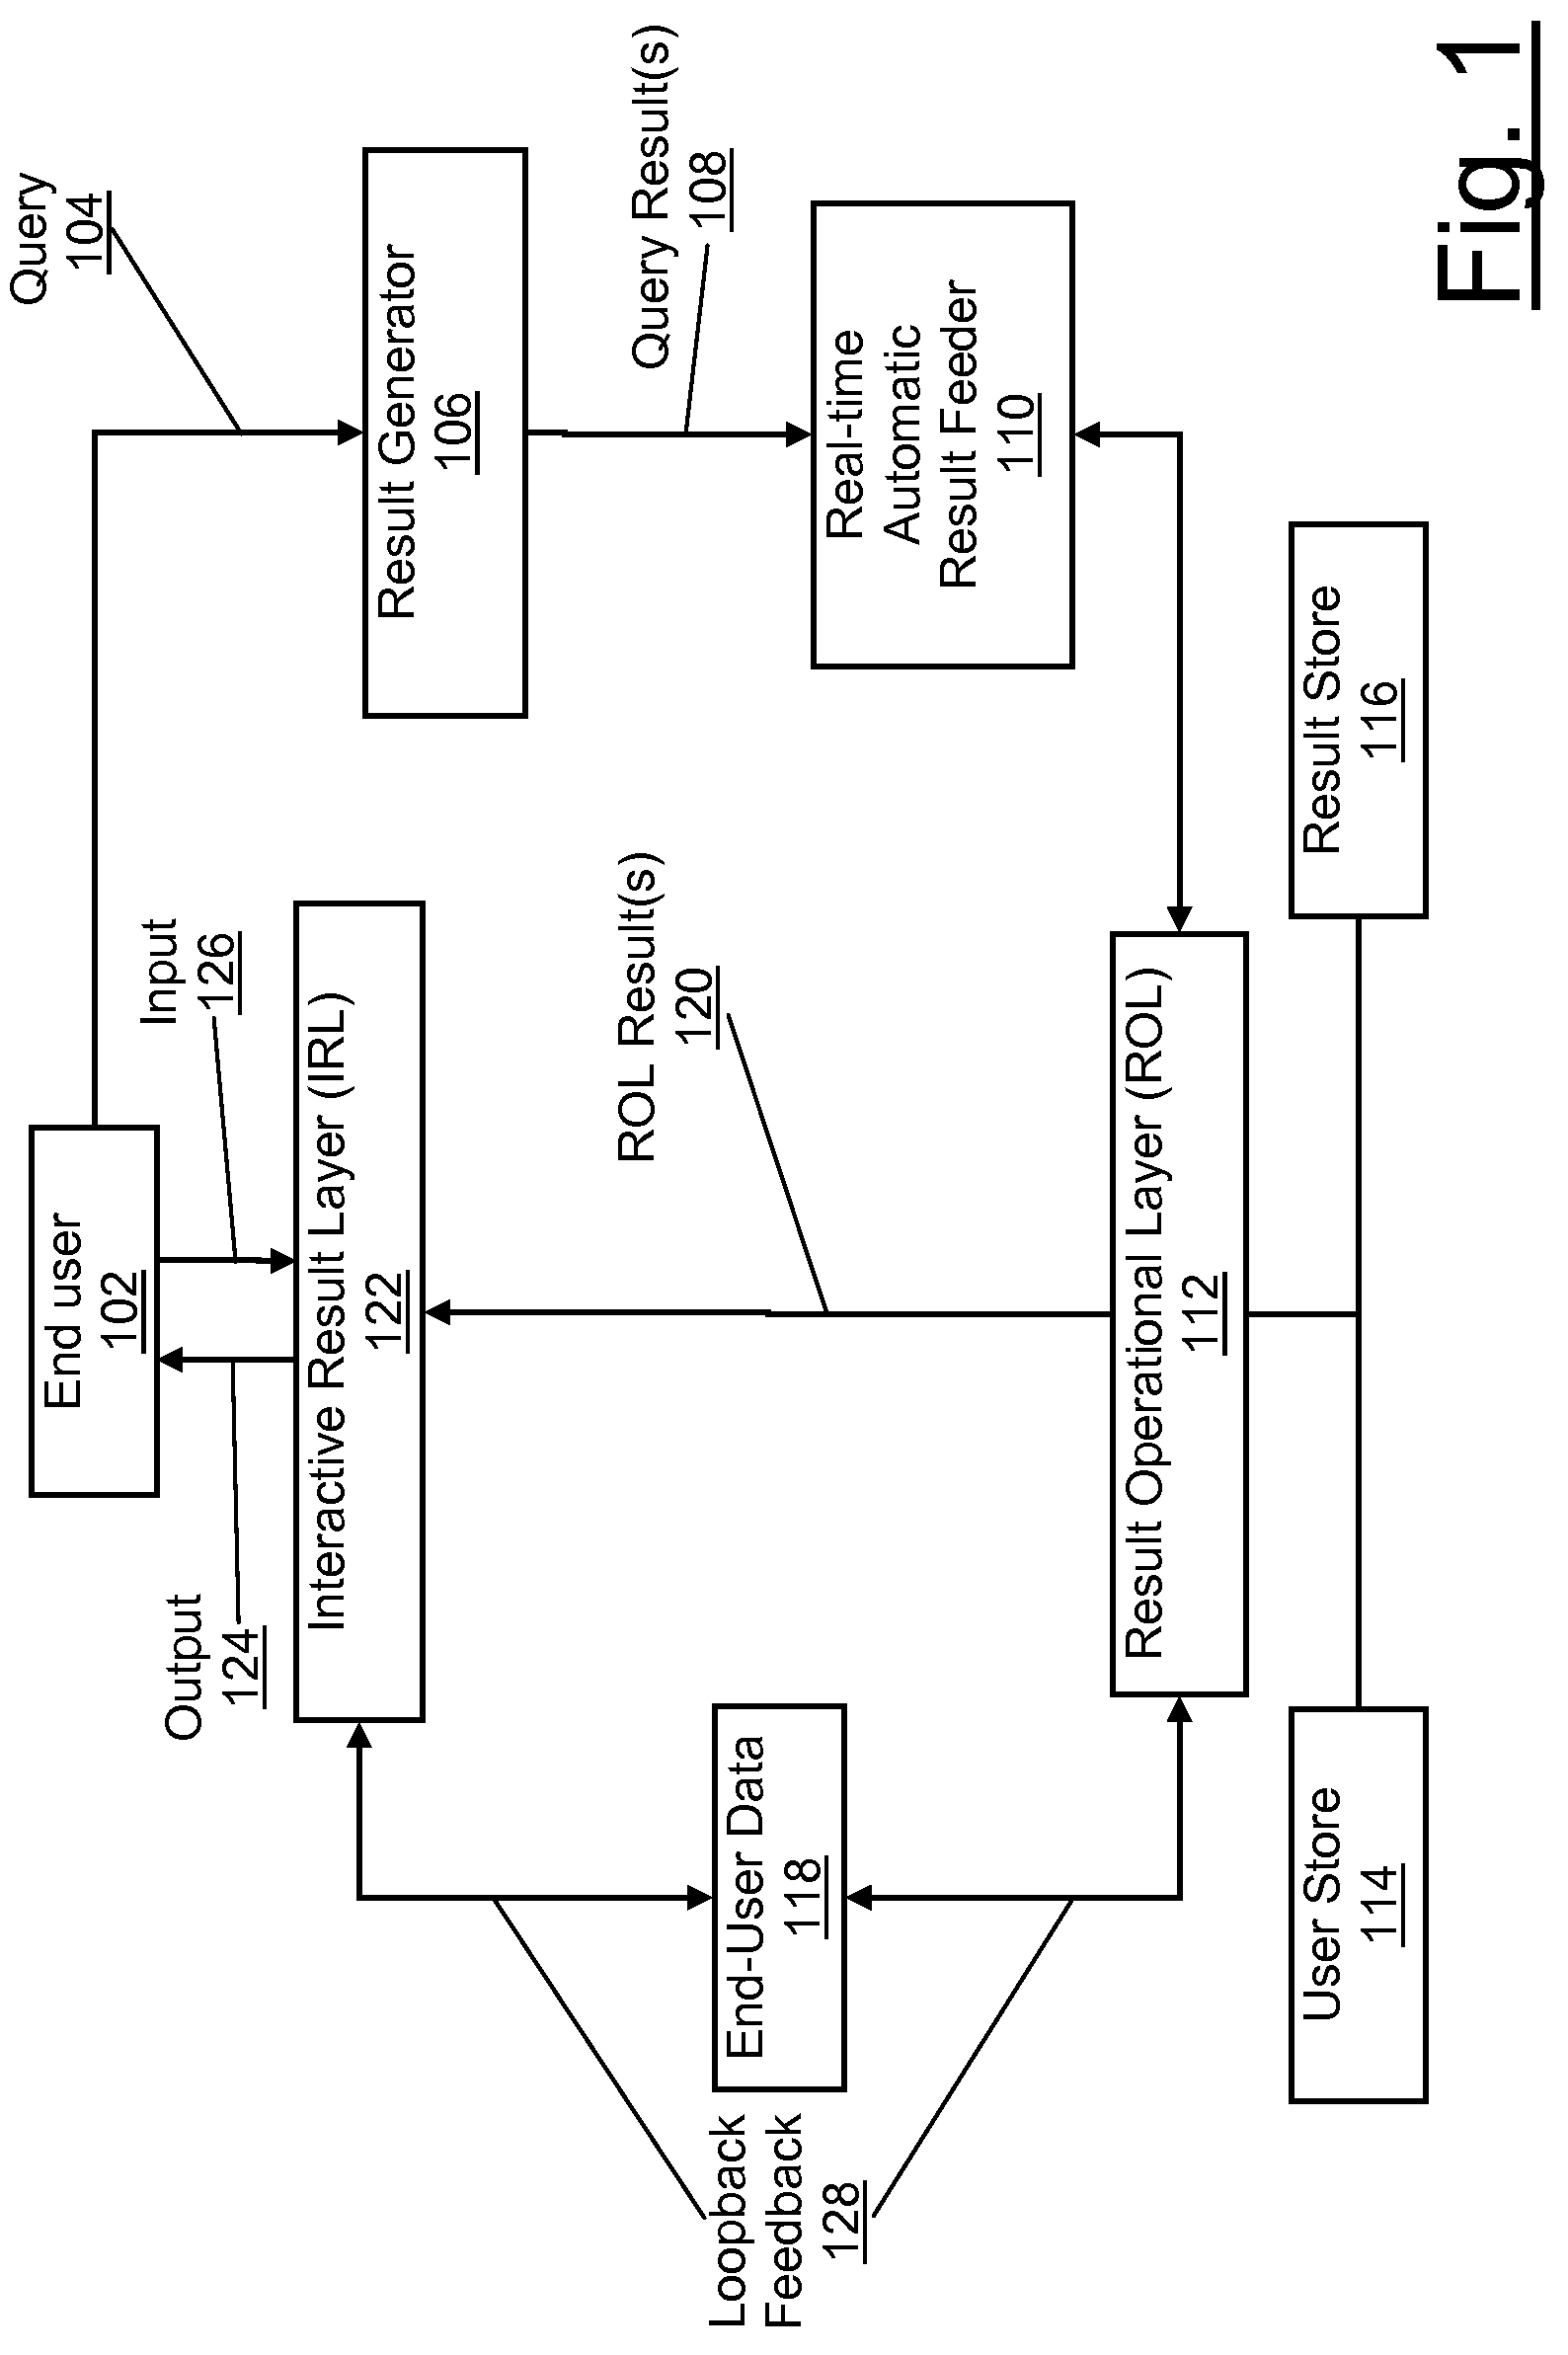 System and method to facilitate real-time end-user awareness in query results through layer approach utilizing end-user interaction, loopback feedback, and automatic result feeder